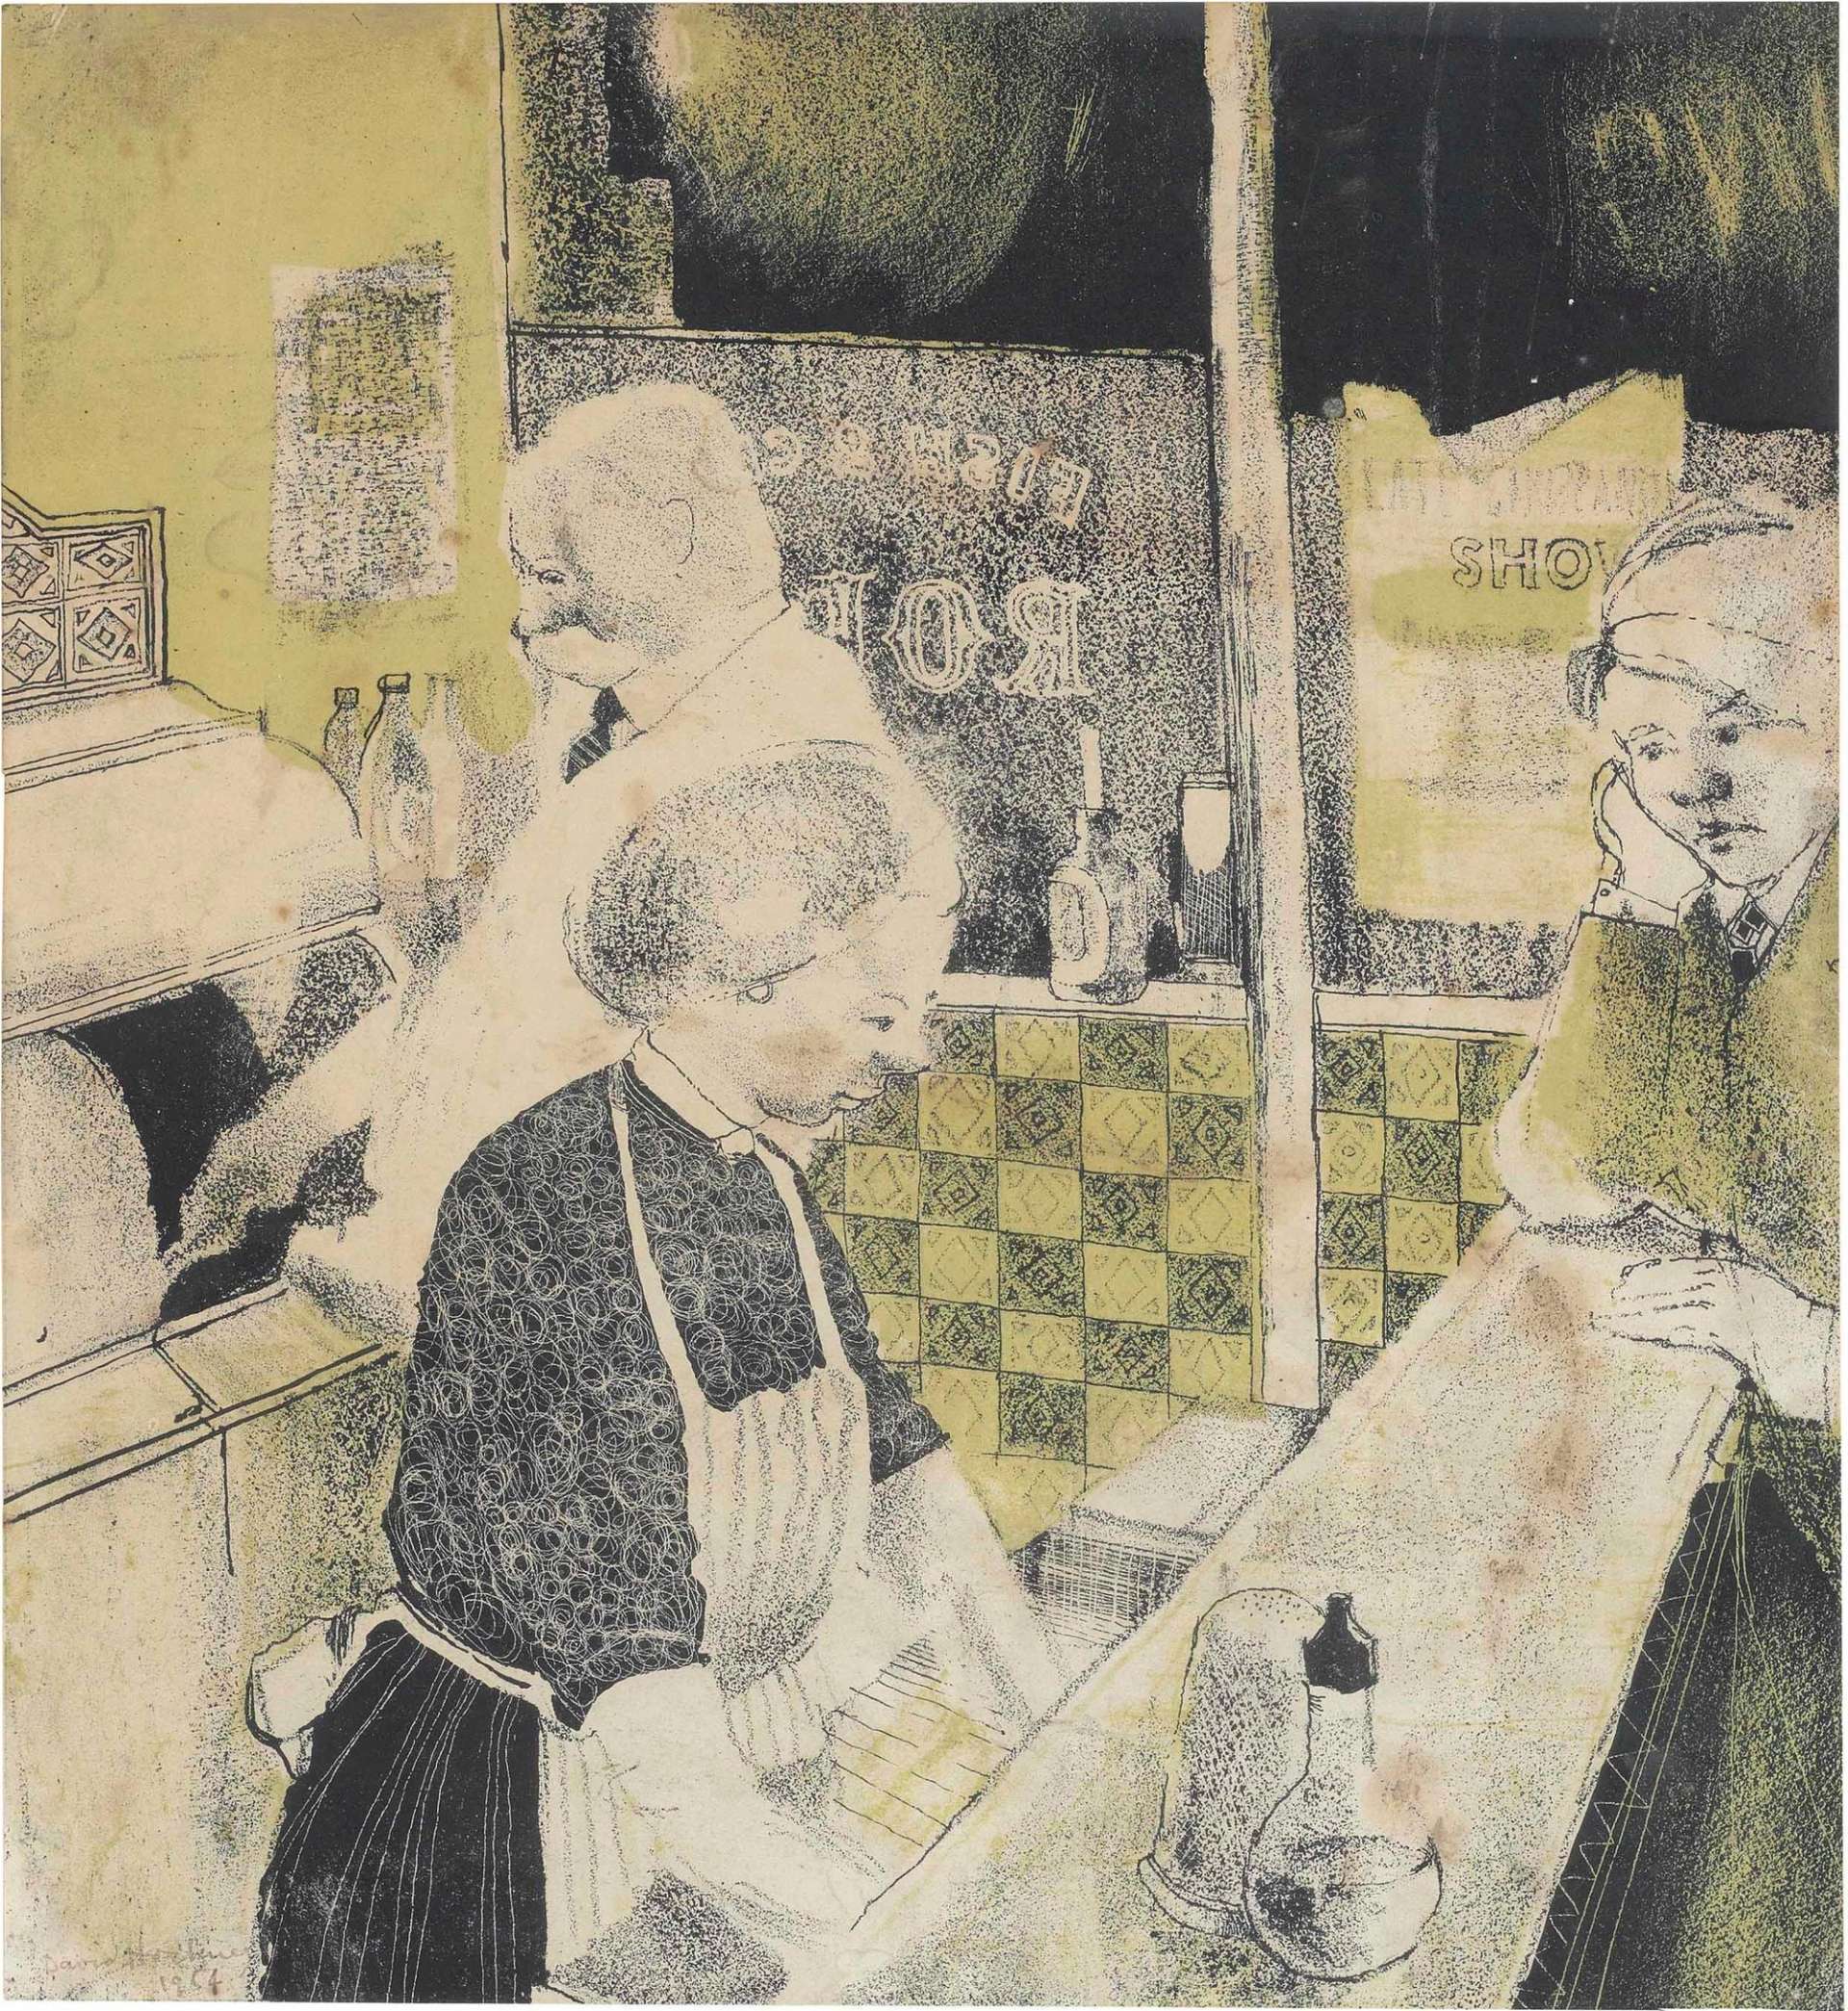 David Hockney’s Fish And Chip Shop. A lithograph of a man standing at a counter ordering food inside of a fish and chip shop. 